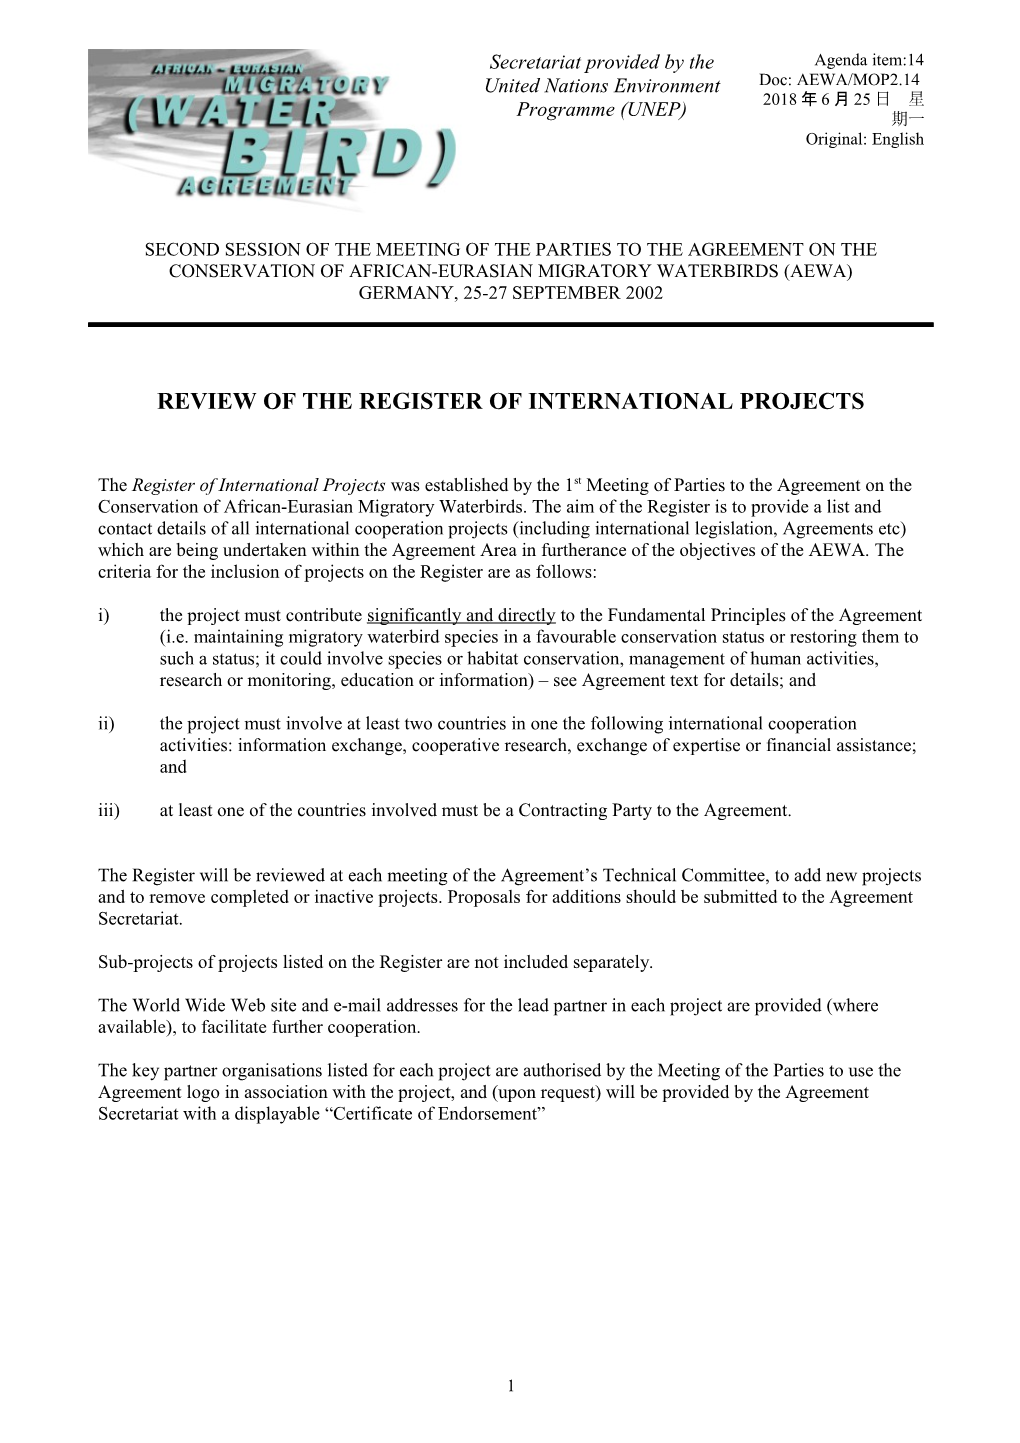 Review of the Register of International Projects